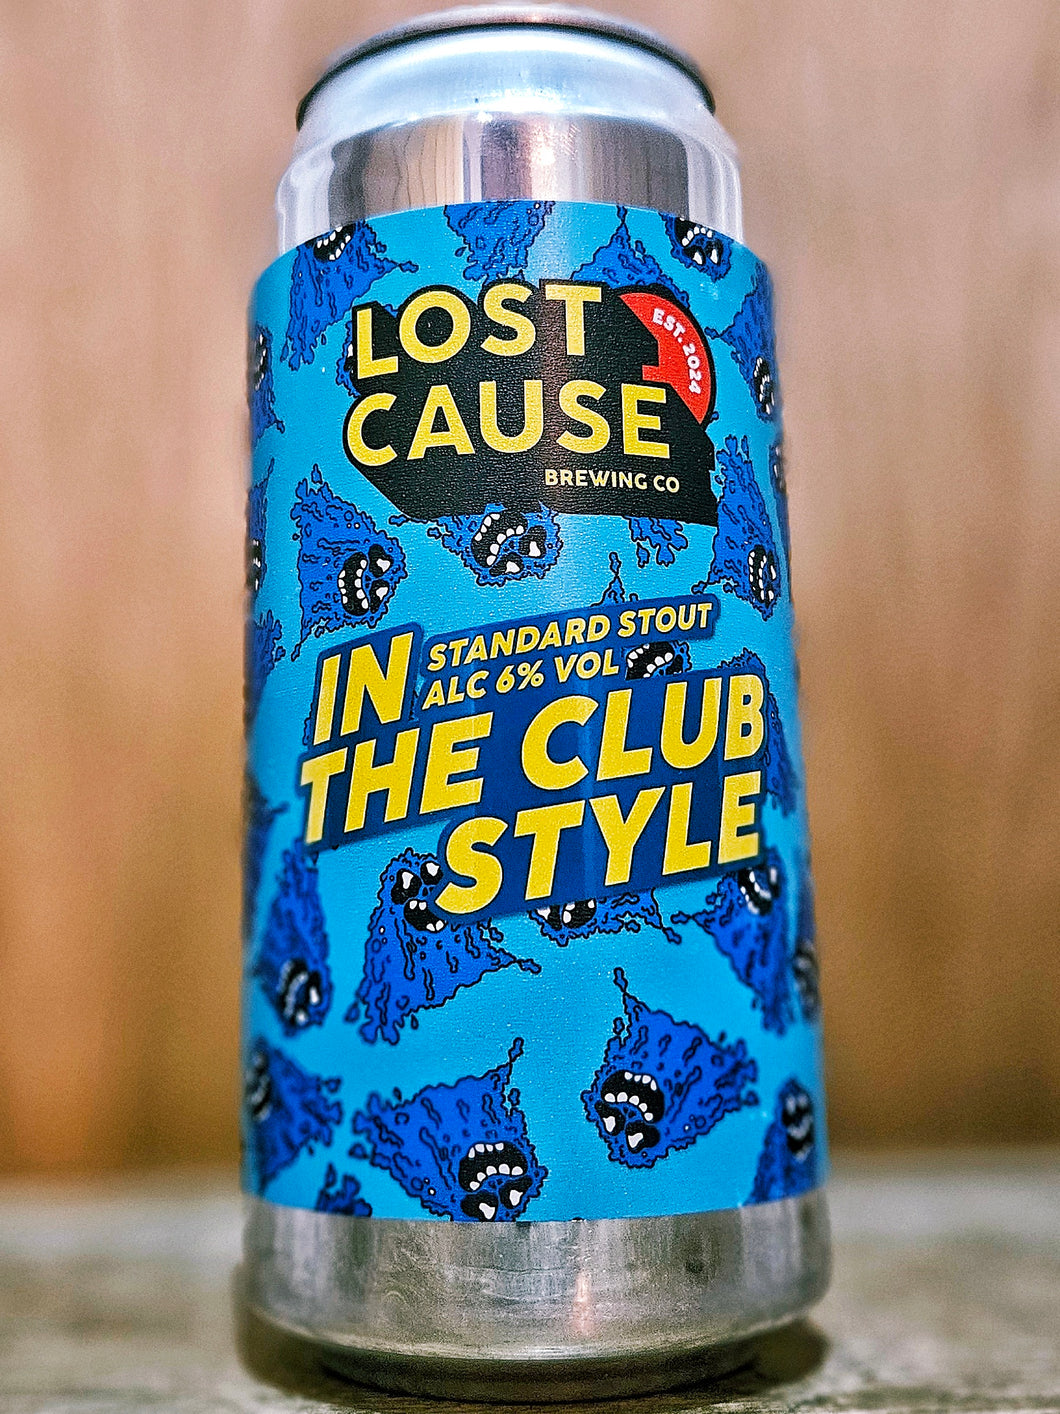 Lost Cause Brewing Co - In The Club Style